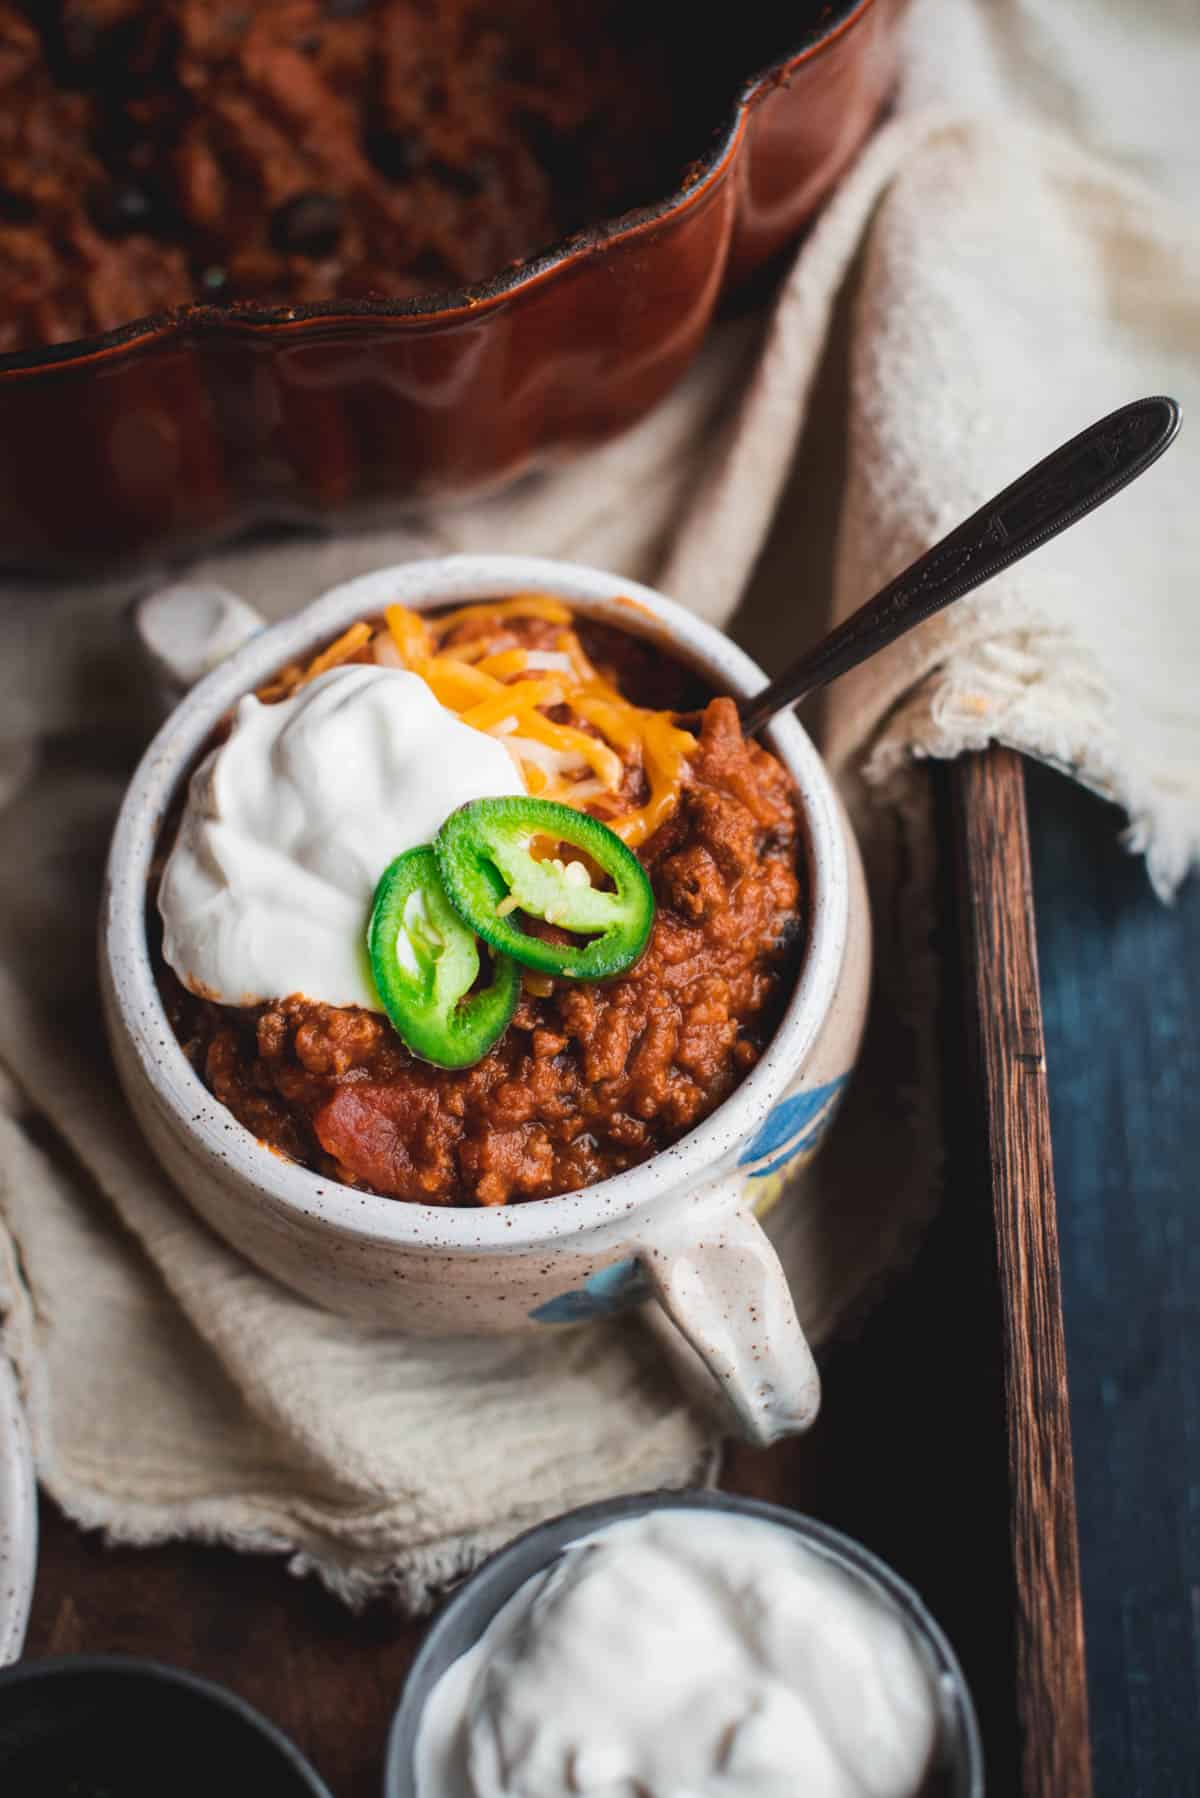 1 white bowl of pumpkin beef chili sitting on a tablecloth on a wooden tray.  The chili is topped with cheese, sour cream and jalapenos. In each corner, part of the chili pot can be seen and part of the pot containing sour cream.